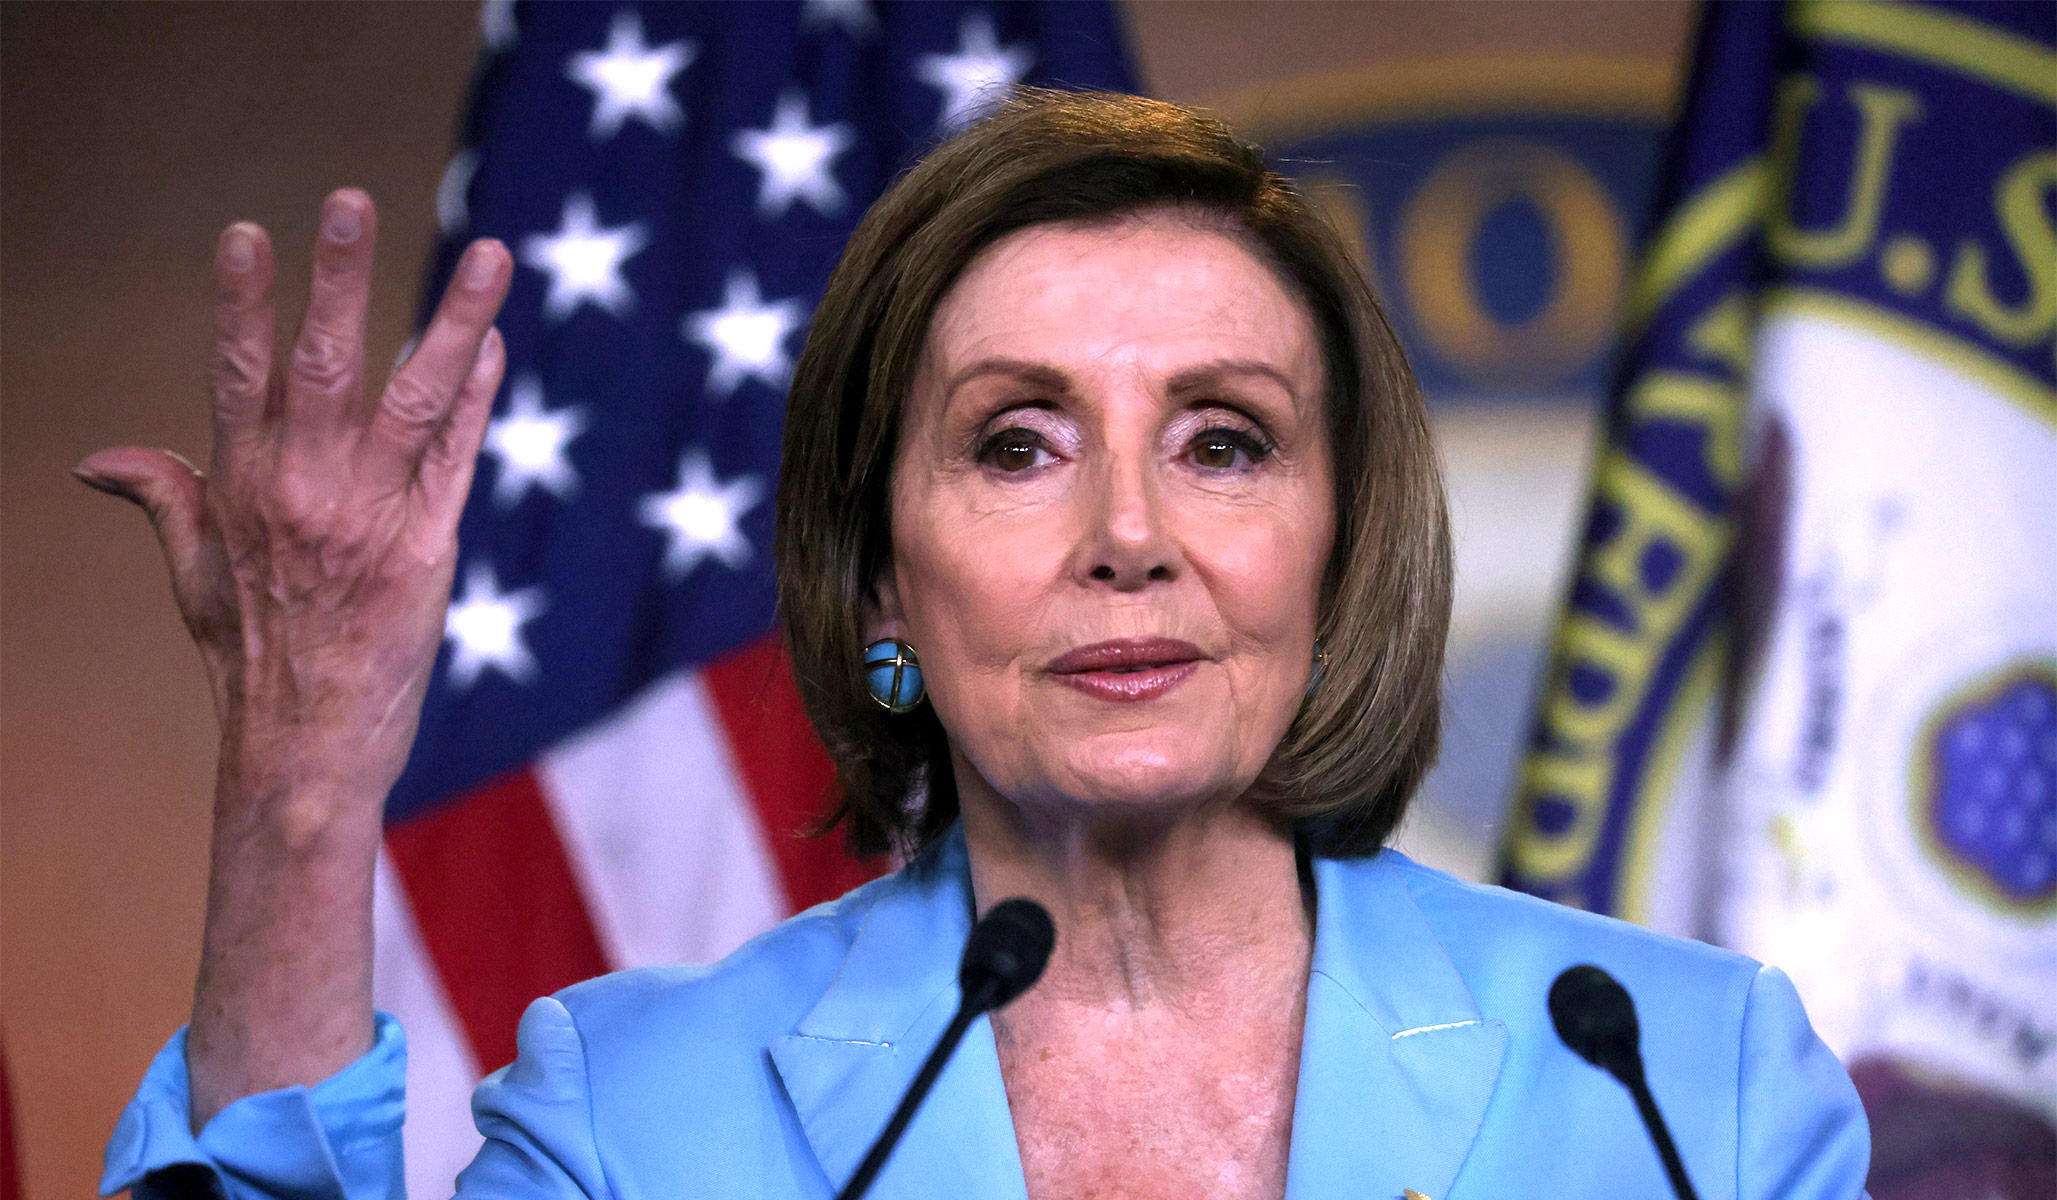 Pelosi Declines to Say Whether She’ll Run for Reelection in 2022